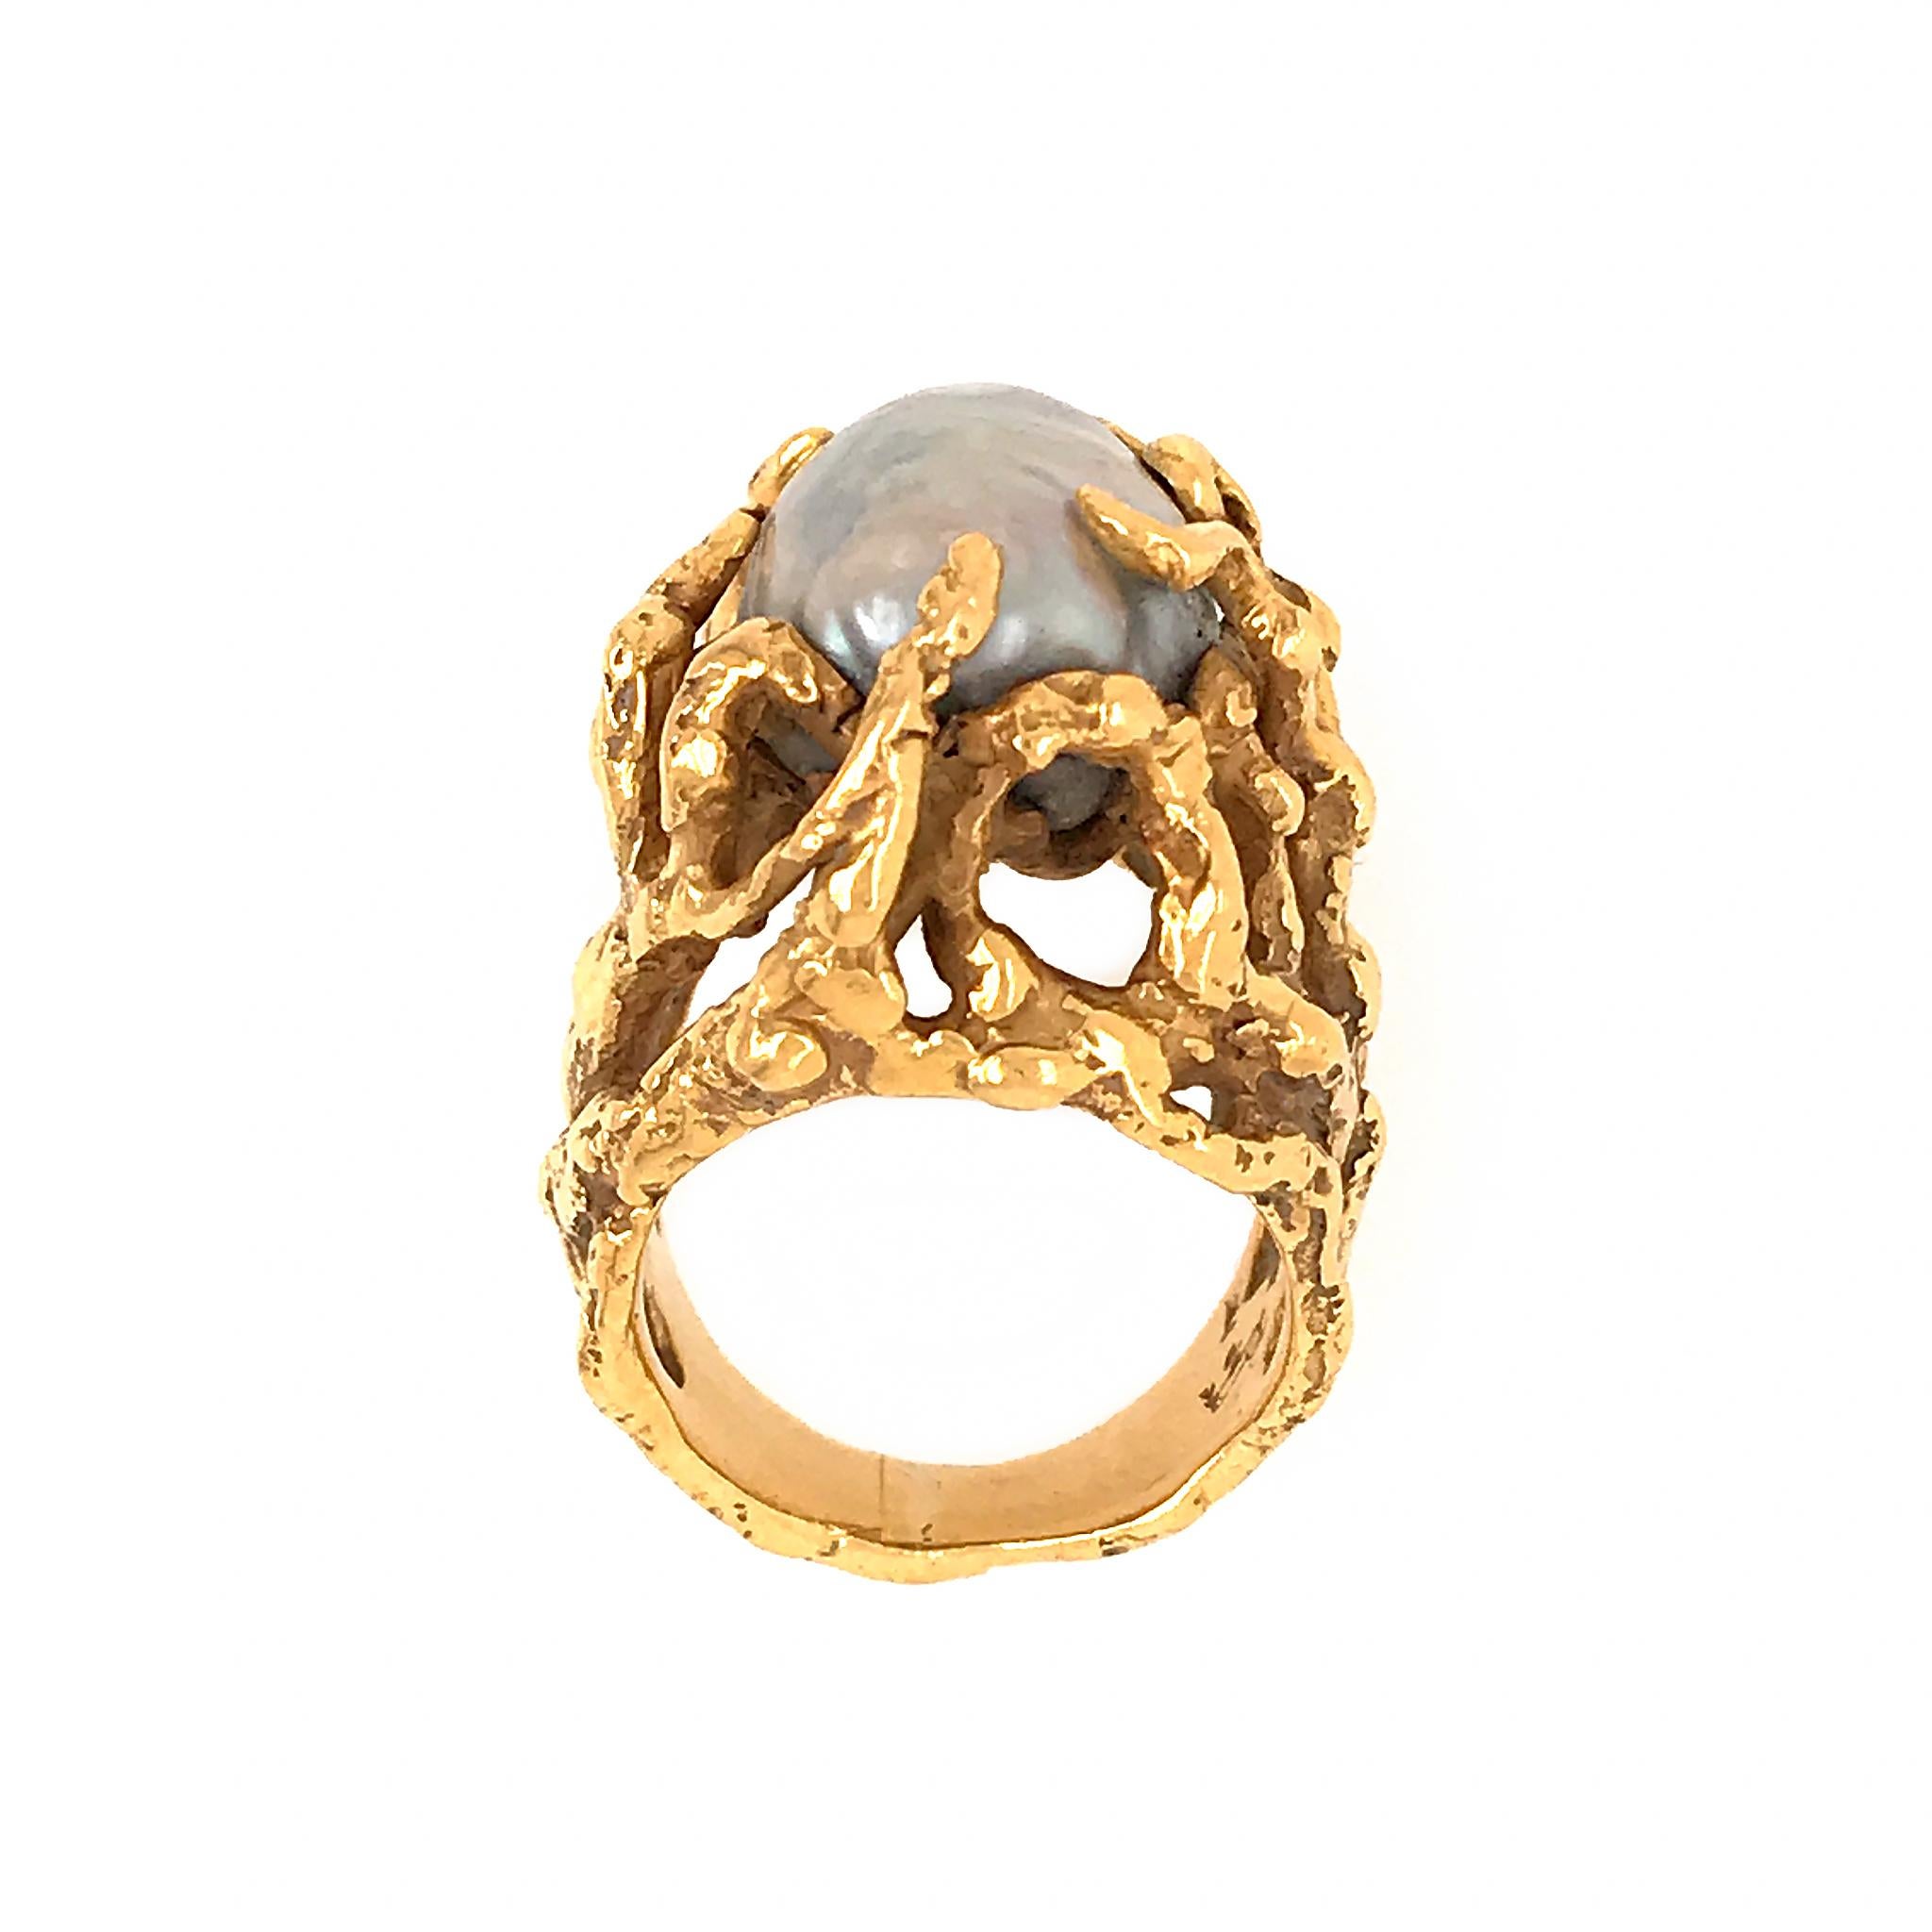 18K Yellow Gold
Total Weight: 21.5 grams
Ring Size: 5.25